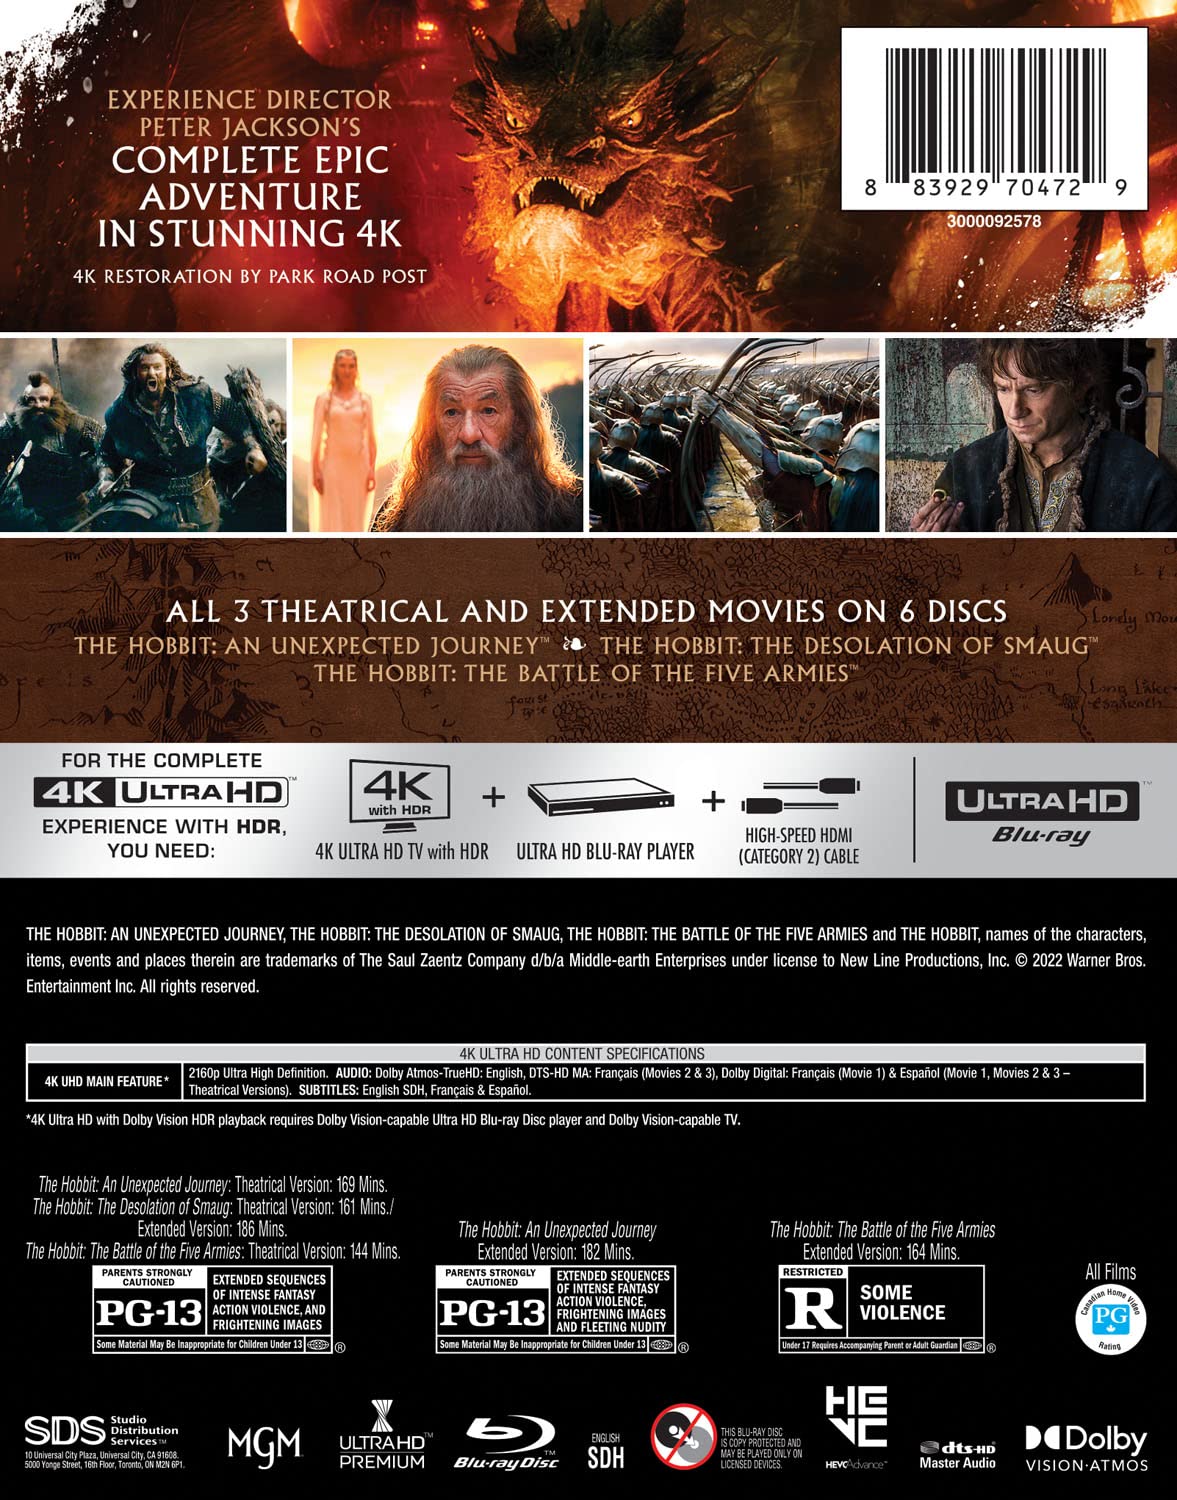 The Hobbit- Motion Picture Trilogy 4k Blu-ray new packaging specs